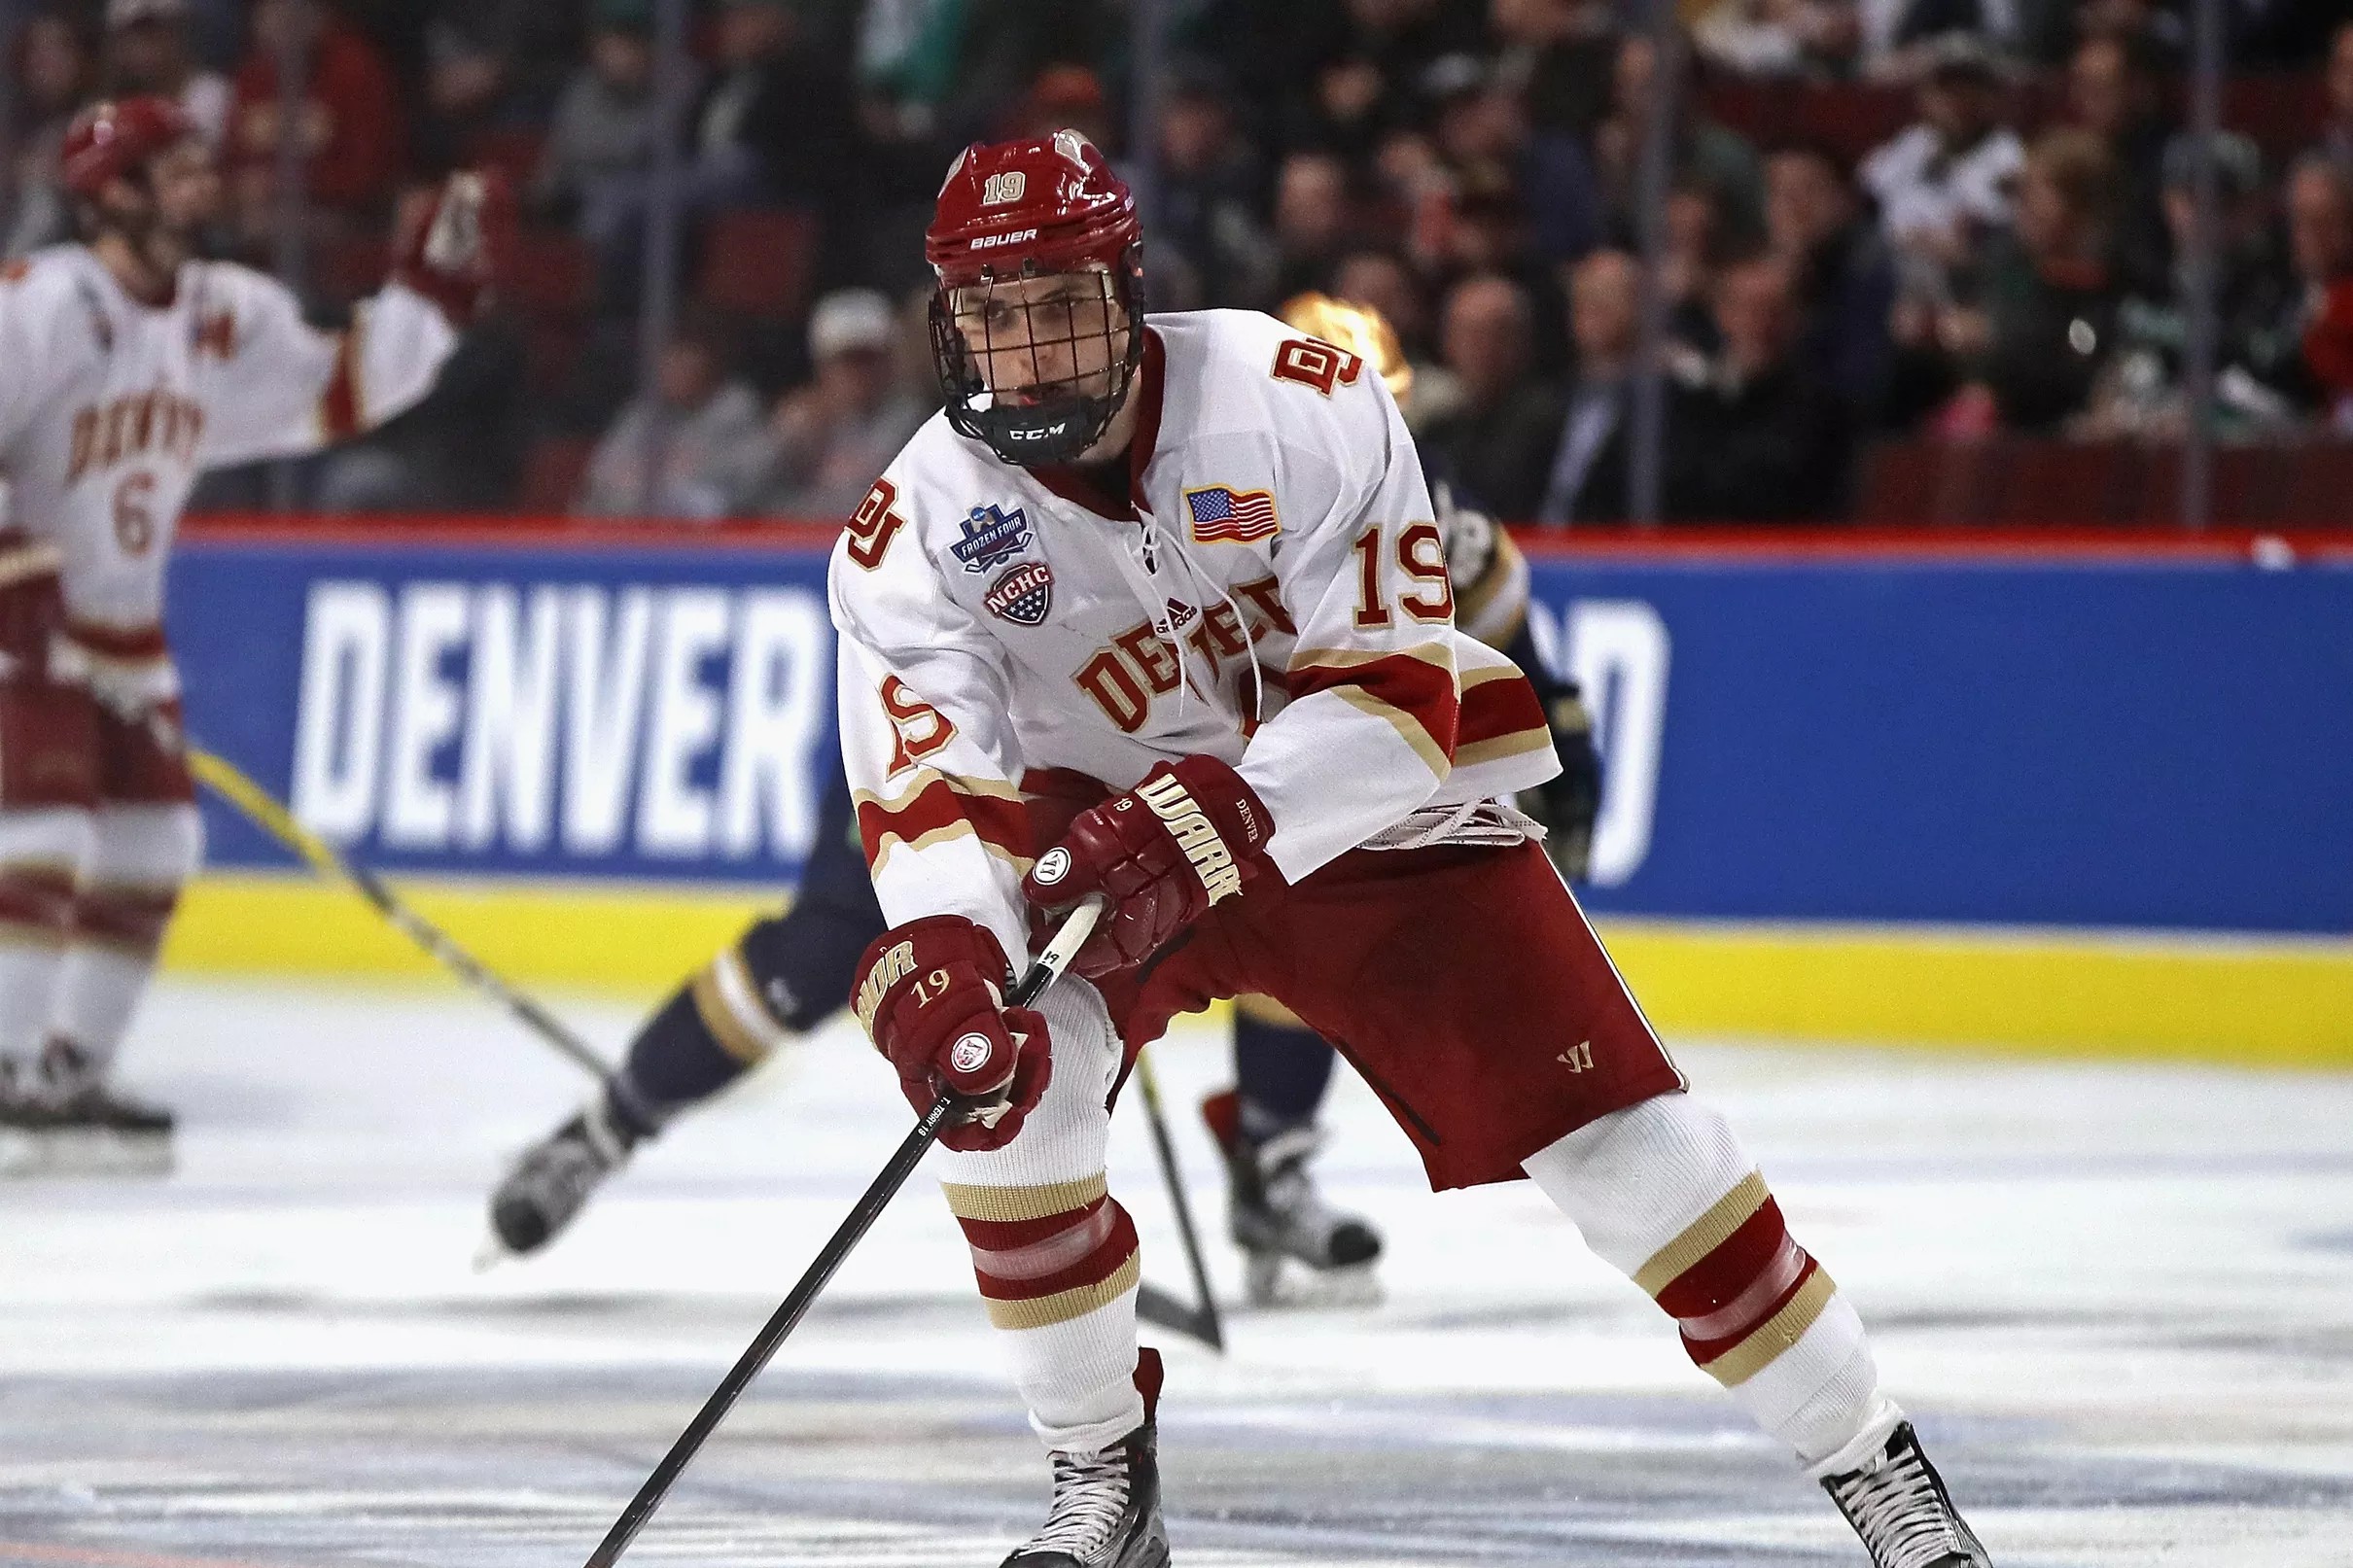 University of Denver Pioneers cruise to first home victory